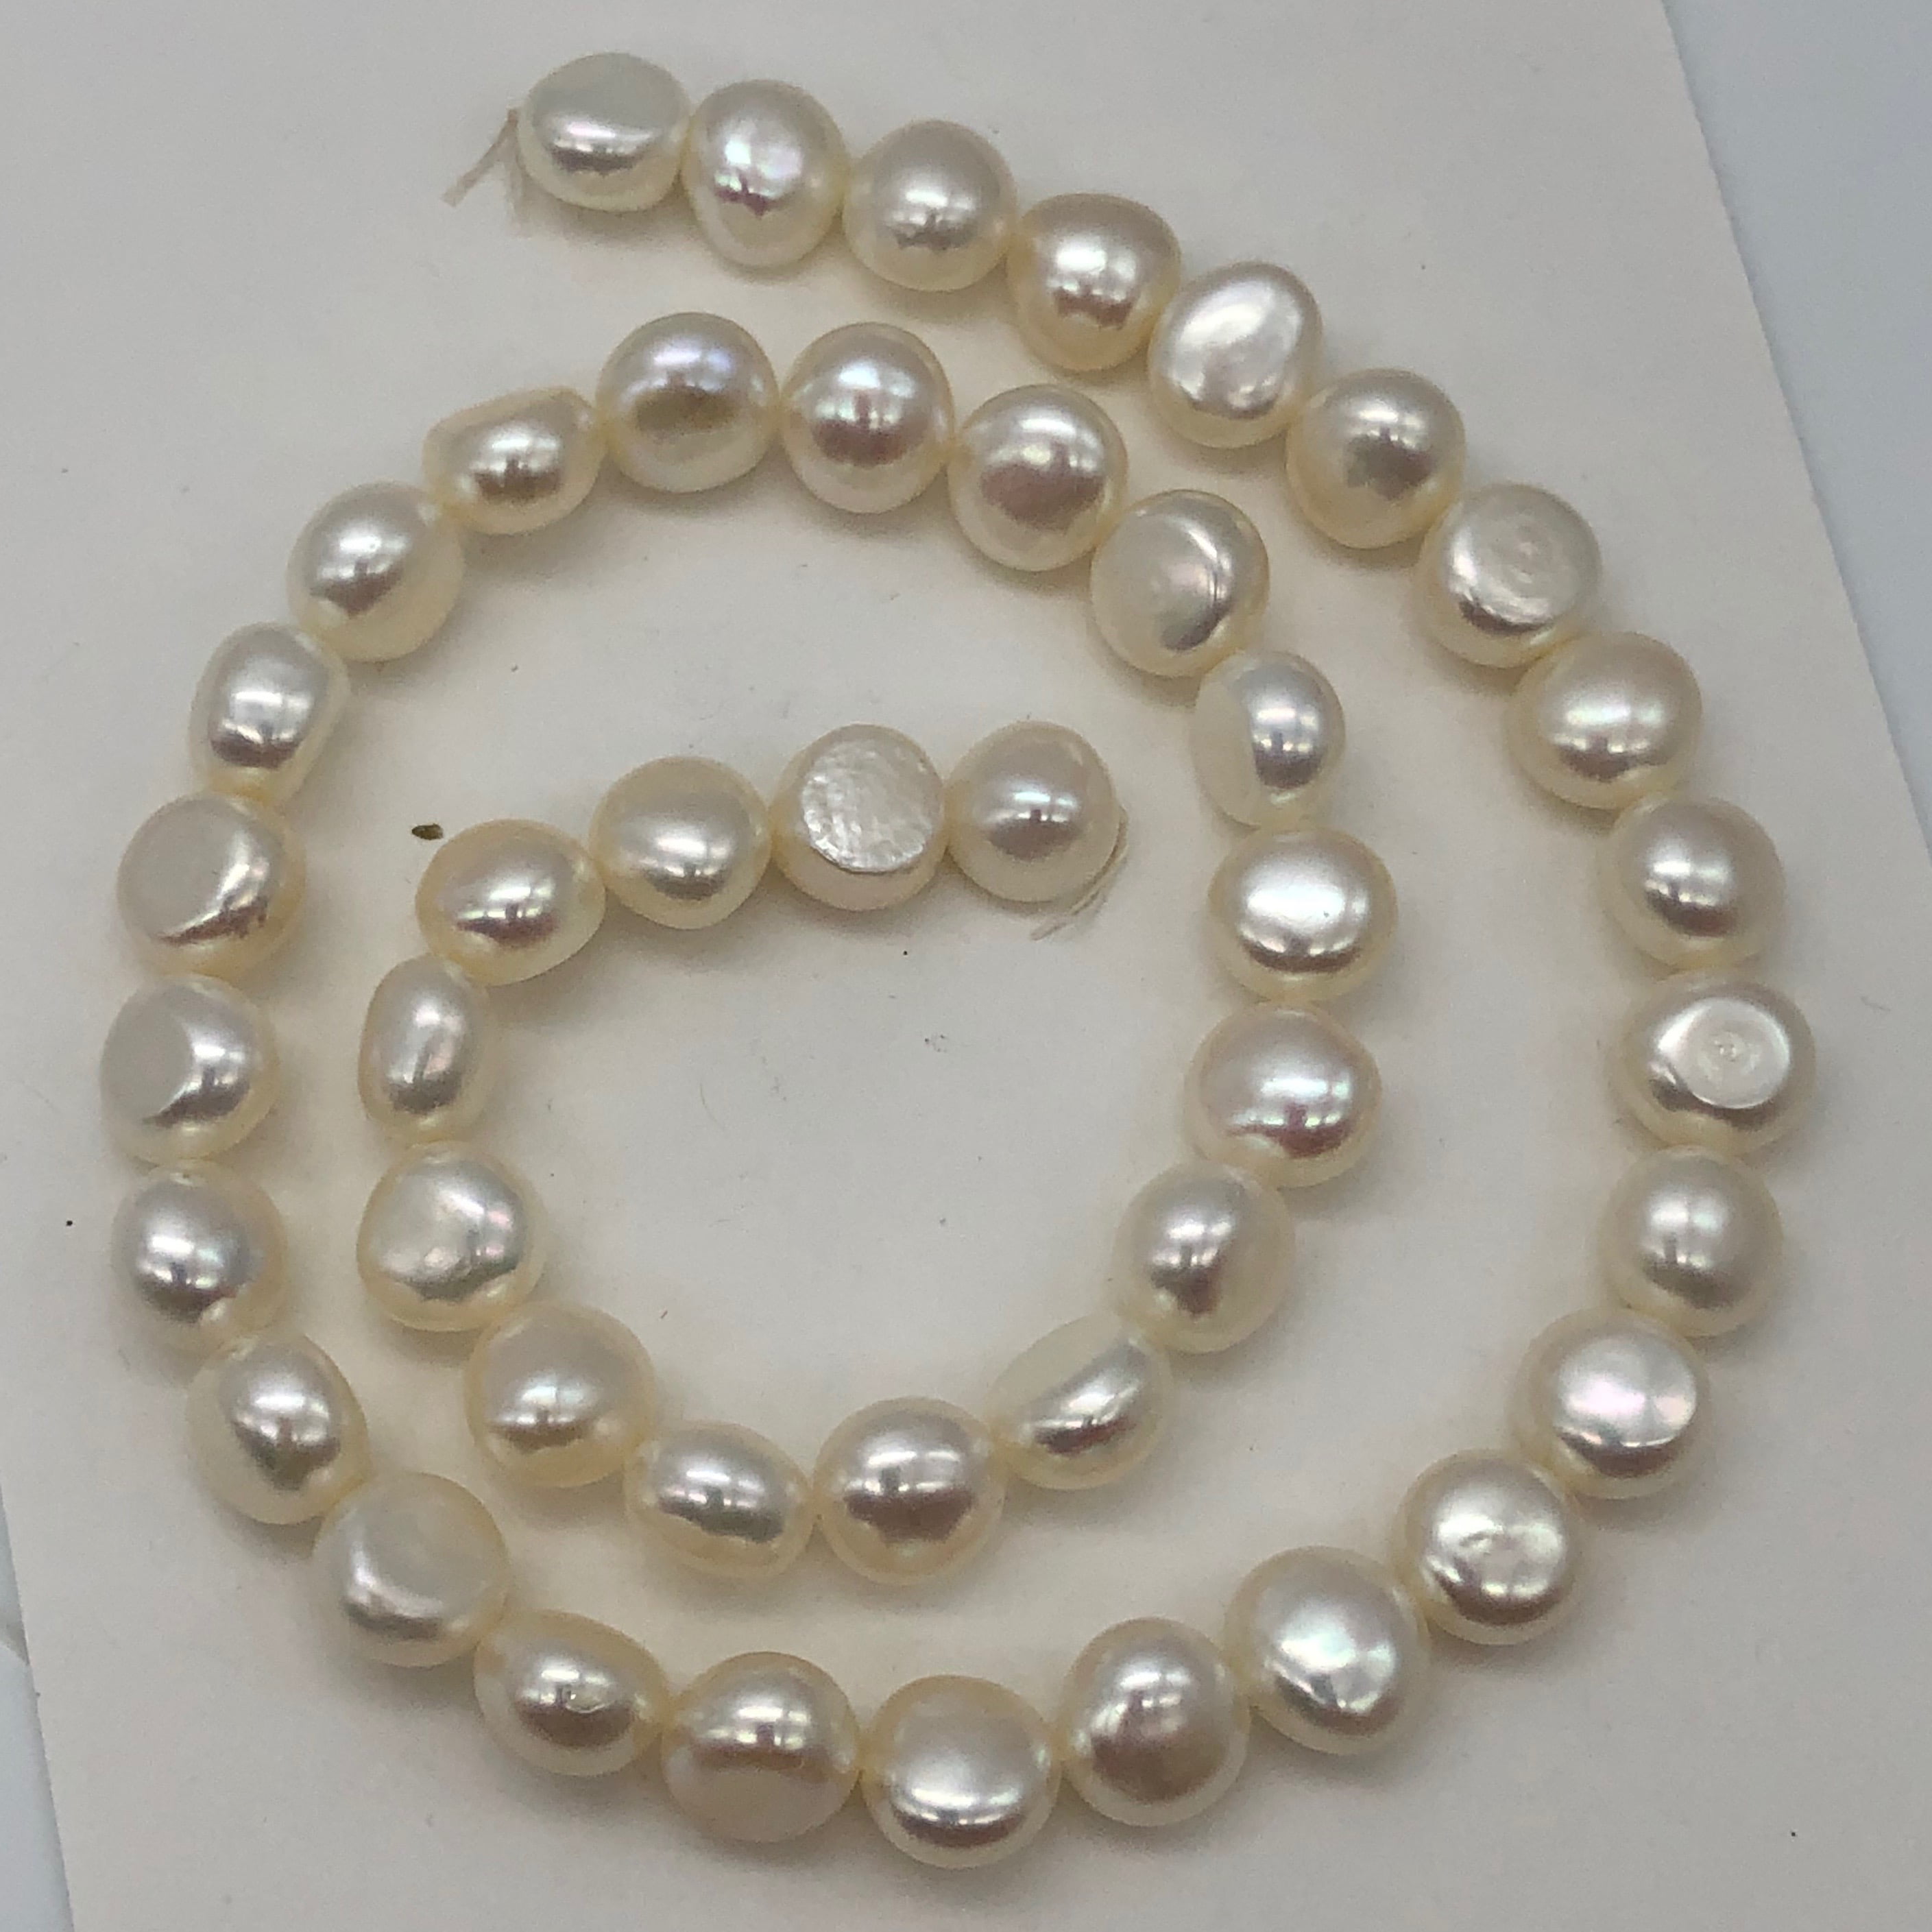 7mm Natural White Freshwater Pearl Baroque Horse Eye Pearl Loose Beads Full Hole 